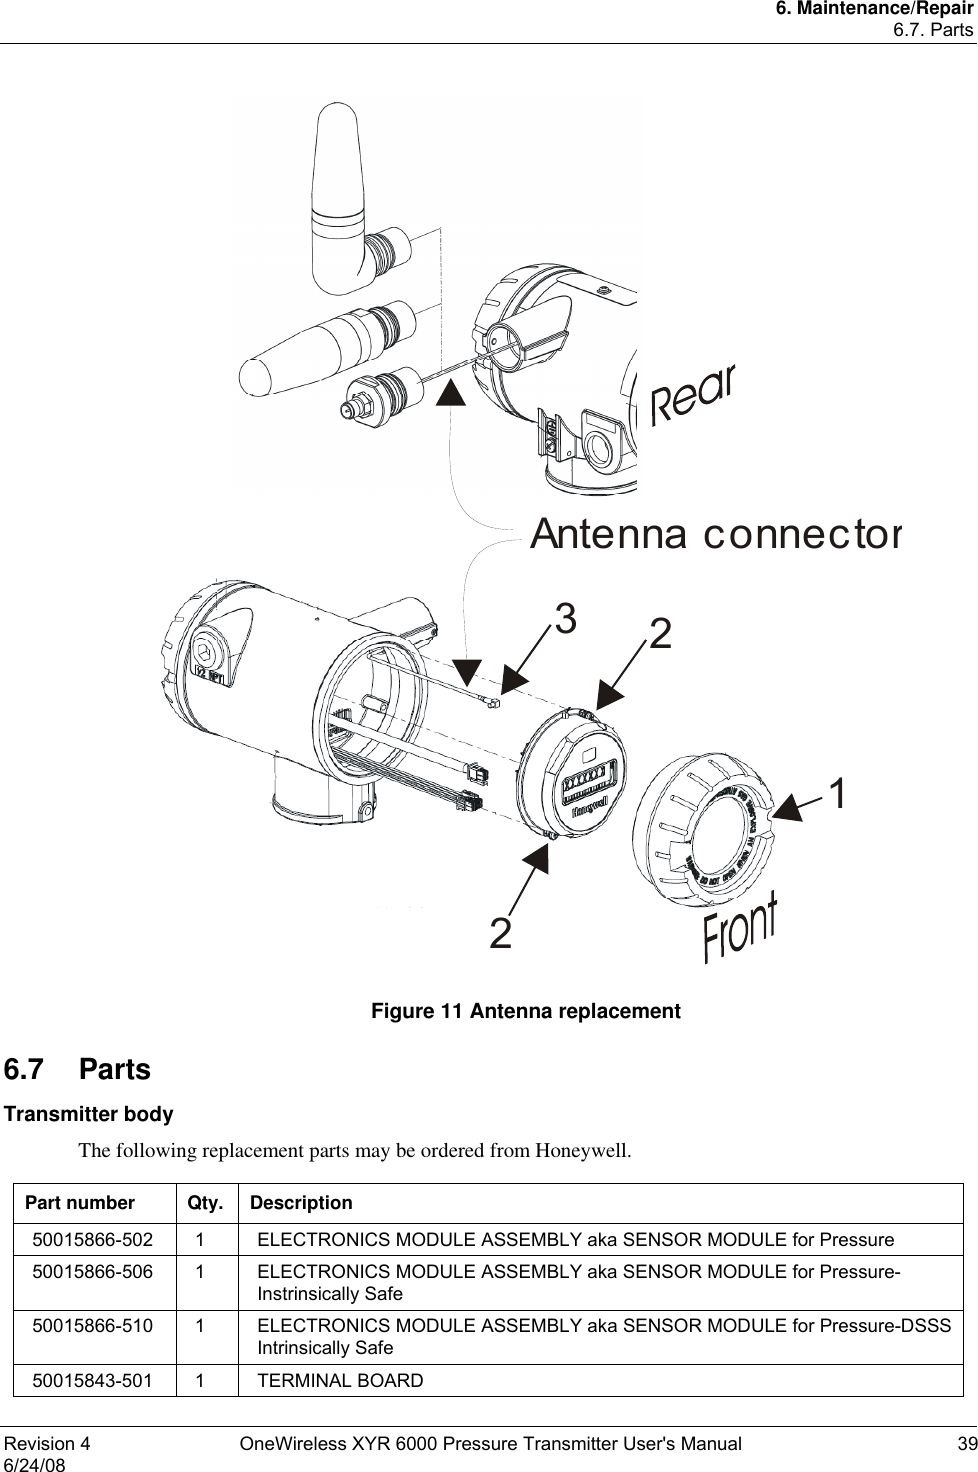 6. Maintenance/Repair 6.7. Parts Revision 4  OneWireless XYR 6000 Pressure Transmitter User&apos;s Manual  39 6/24/08  Antenna connector1223  Figure 11 Antenna replacement 6.7 Parts Transmitter body The following replacement parts may be ordered from Honeywell.  Part number  Qty.  Description 50015866-502  1  ELECTRONICS MODULE ASSEMBLY aka SENSOR MODULE for Pressure 50015866-506  1  ELECTRONICS MODULE ASSEMBLY aka SENSOR MODULE for Pressure-Instrinsically Safe 50015866-510  1  ELECTRONICS MODULE ASSEMBLY aka SENSOR MODULE for Pressure-DSSS Intrinsically Safe 50015843-501 1  TERMINAL BOARD 